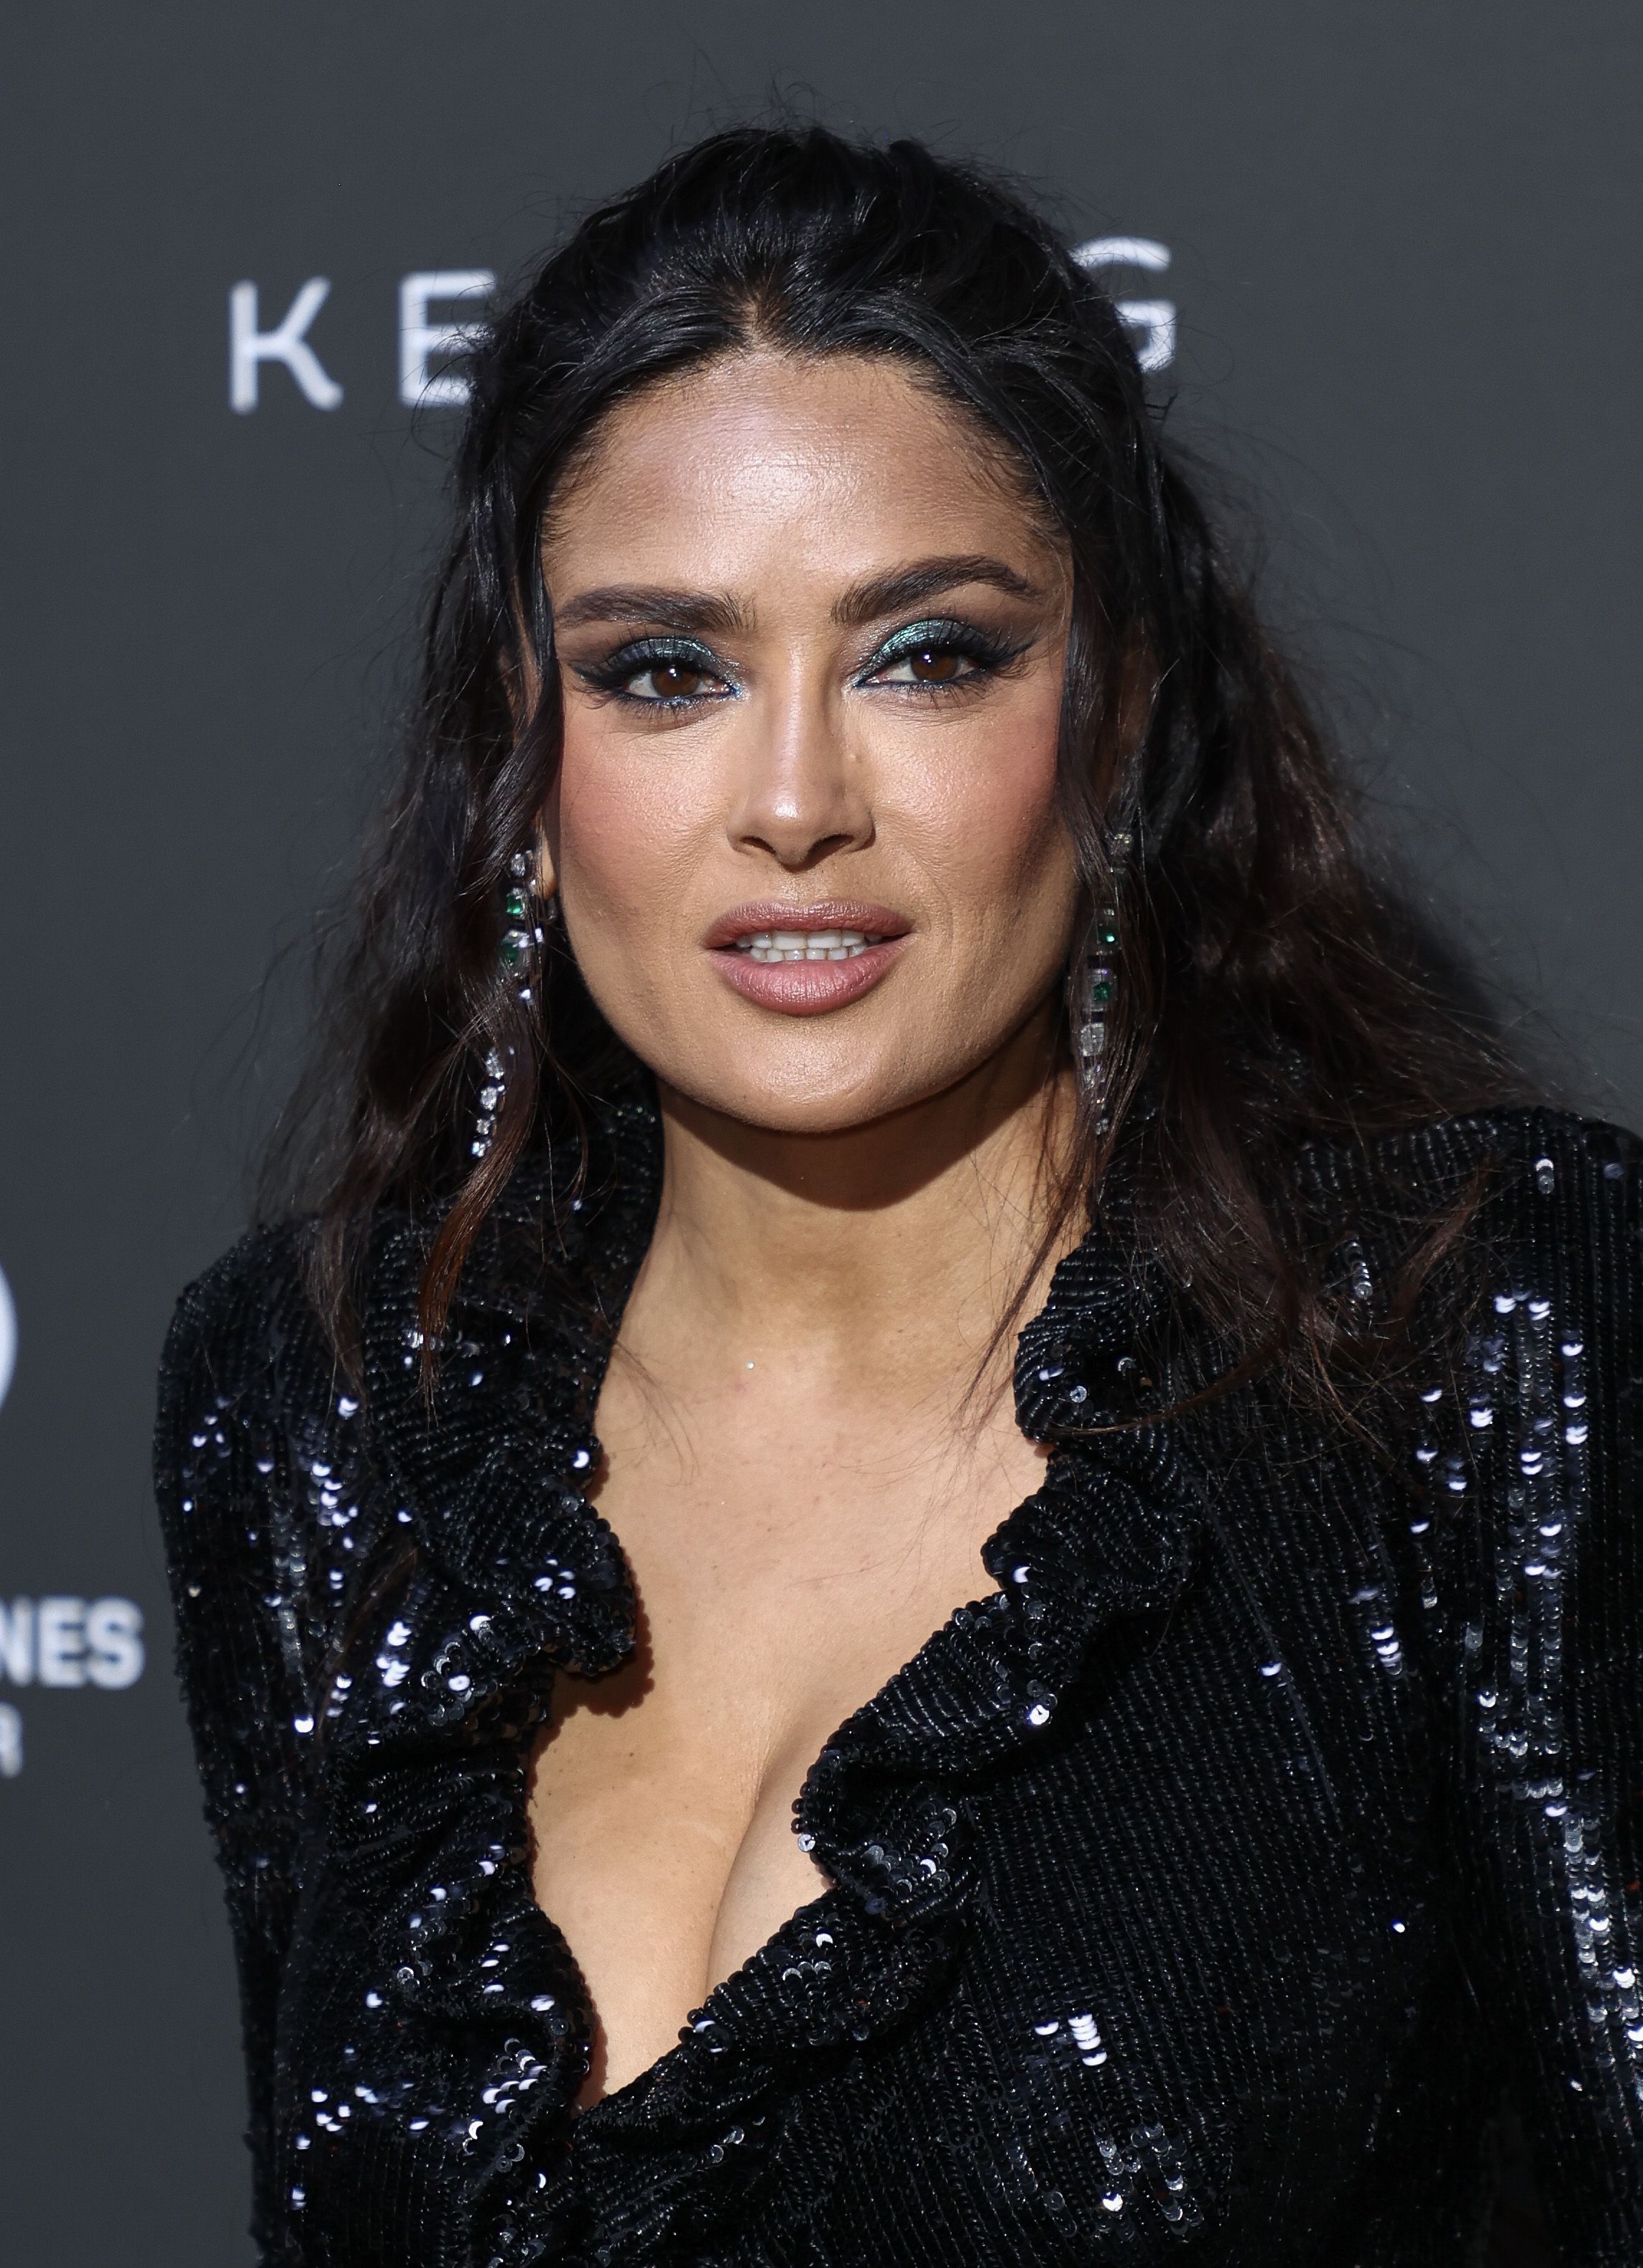 Salma Hayek, 56, Poses Nude, Showing Off Abs in Sauna picture